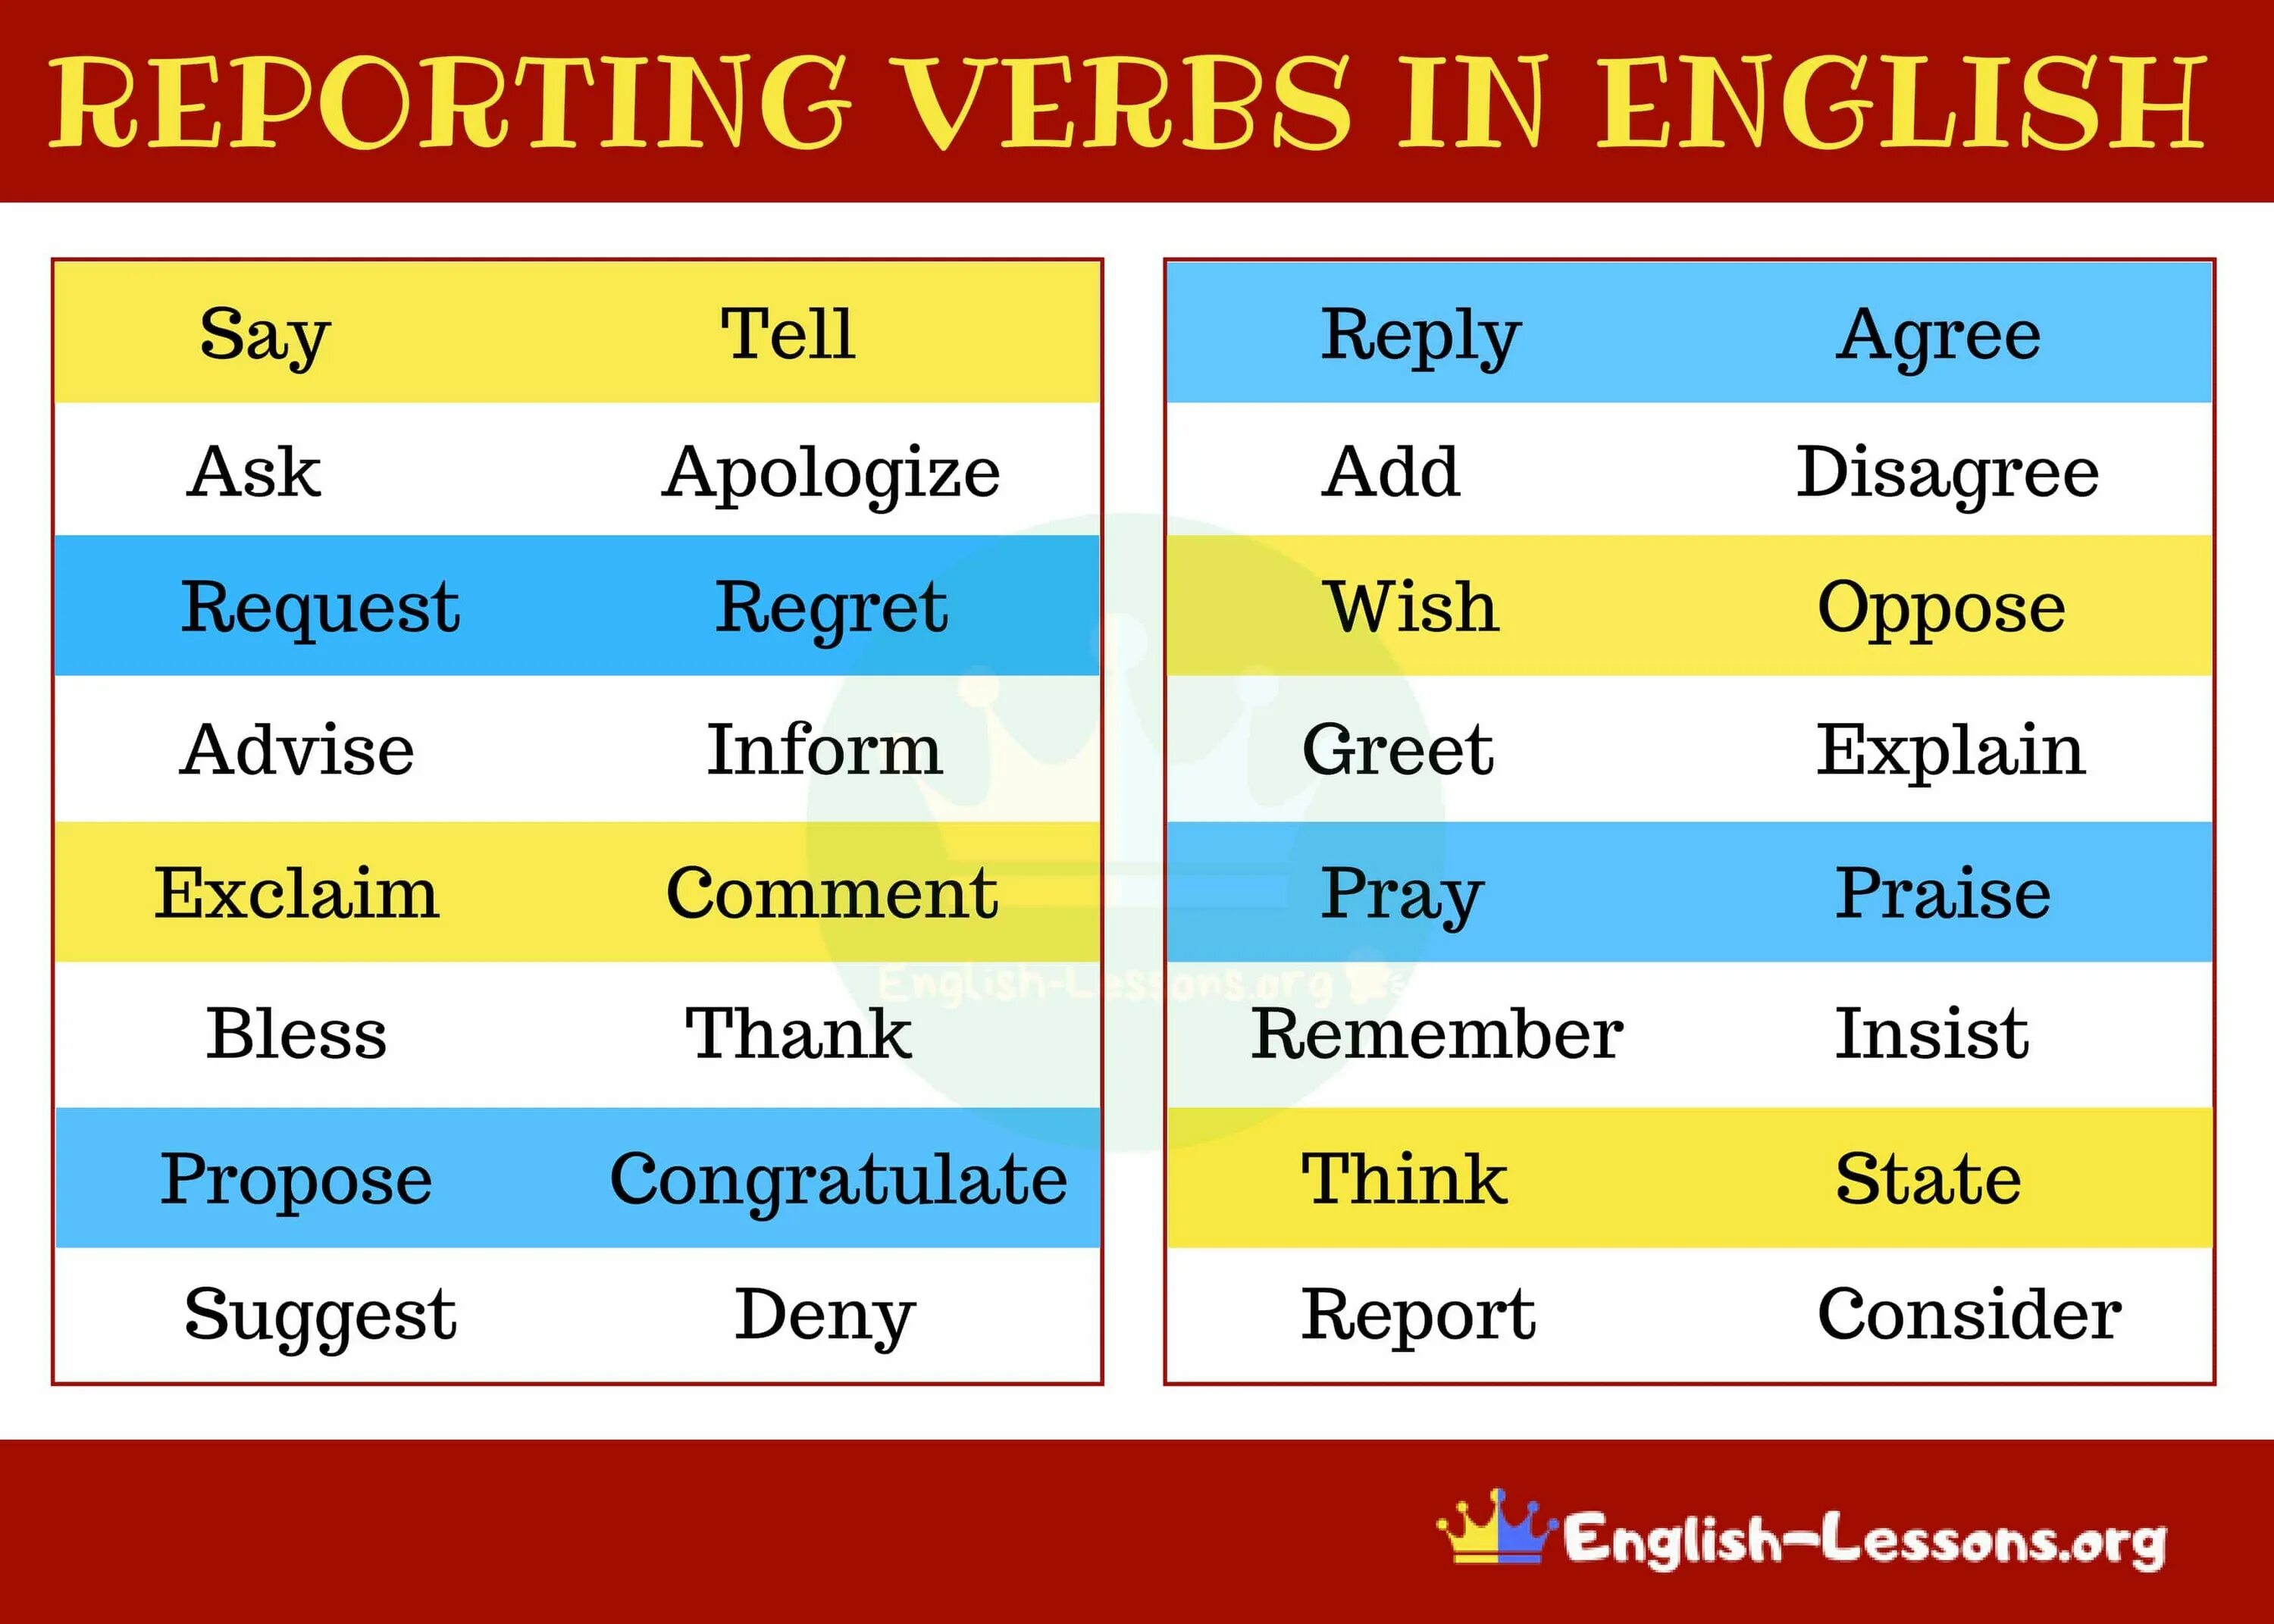 Reporting verbs. Reporting verbs в английском языке. Reporting verbs список. Reporting verbs list. Report глагол